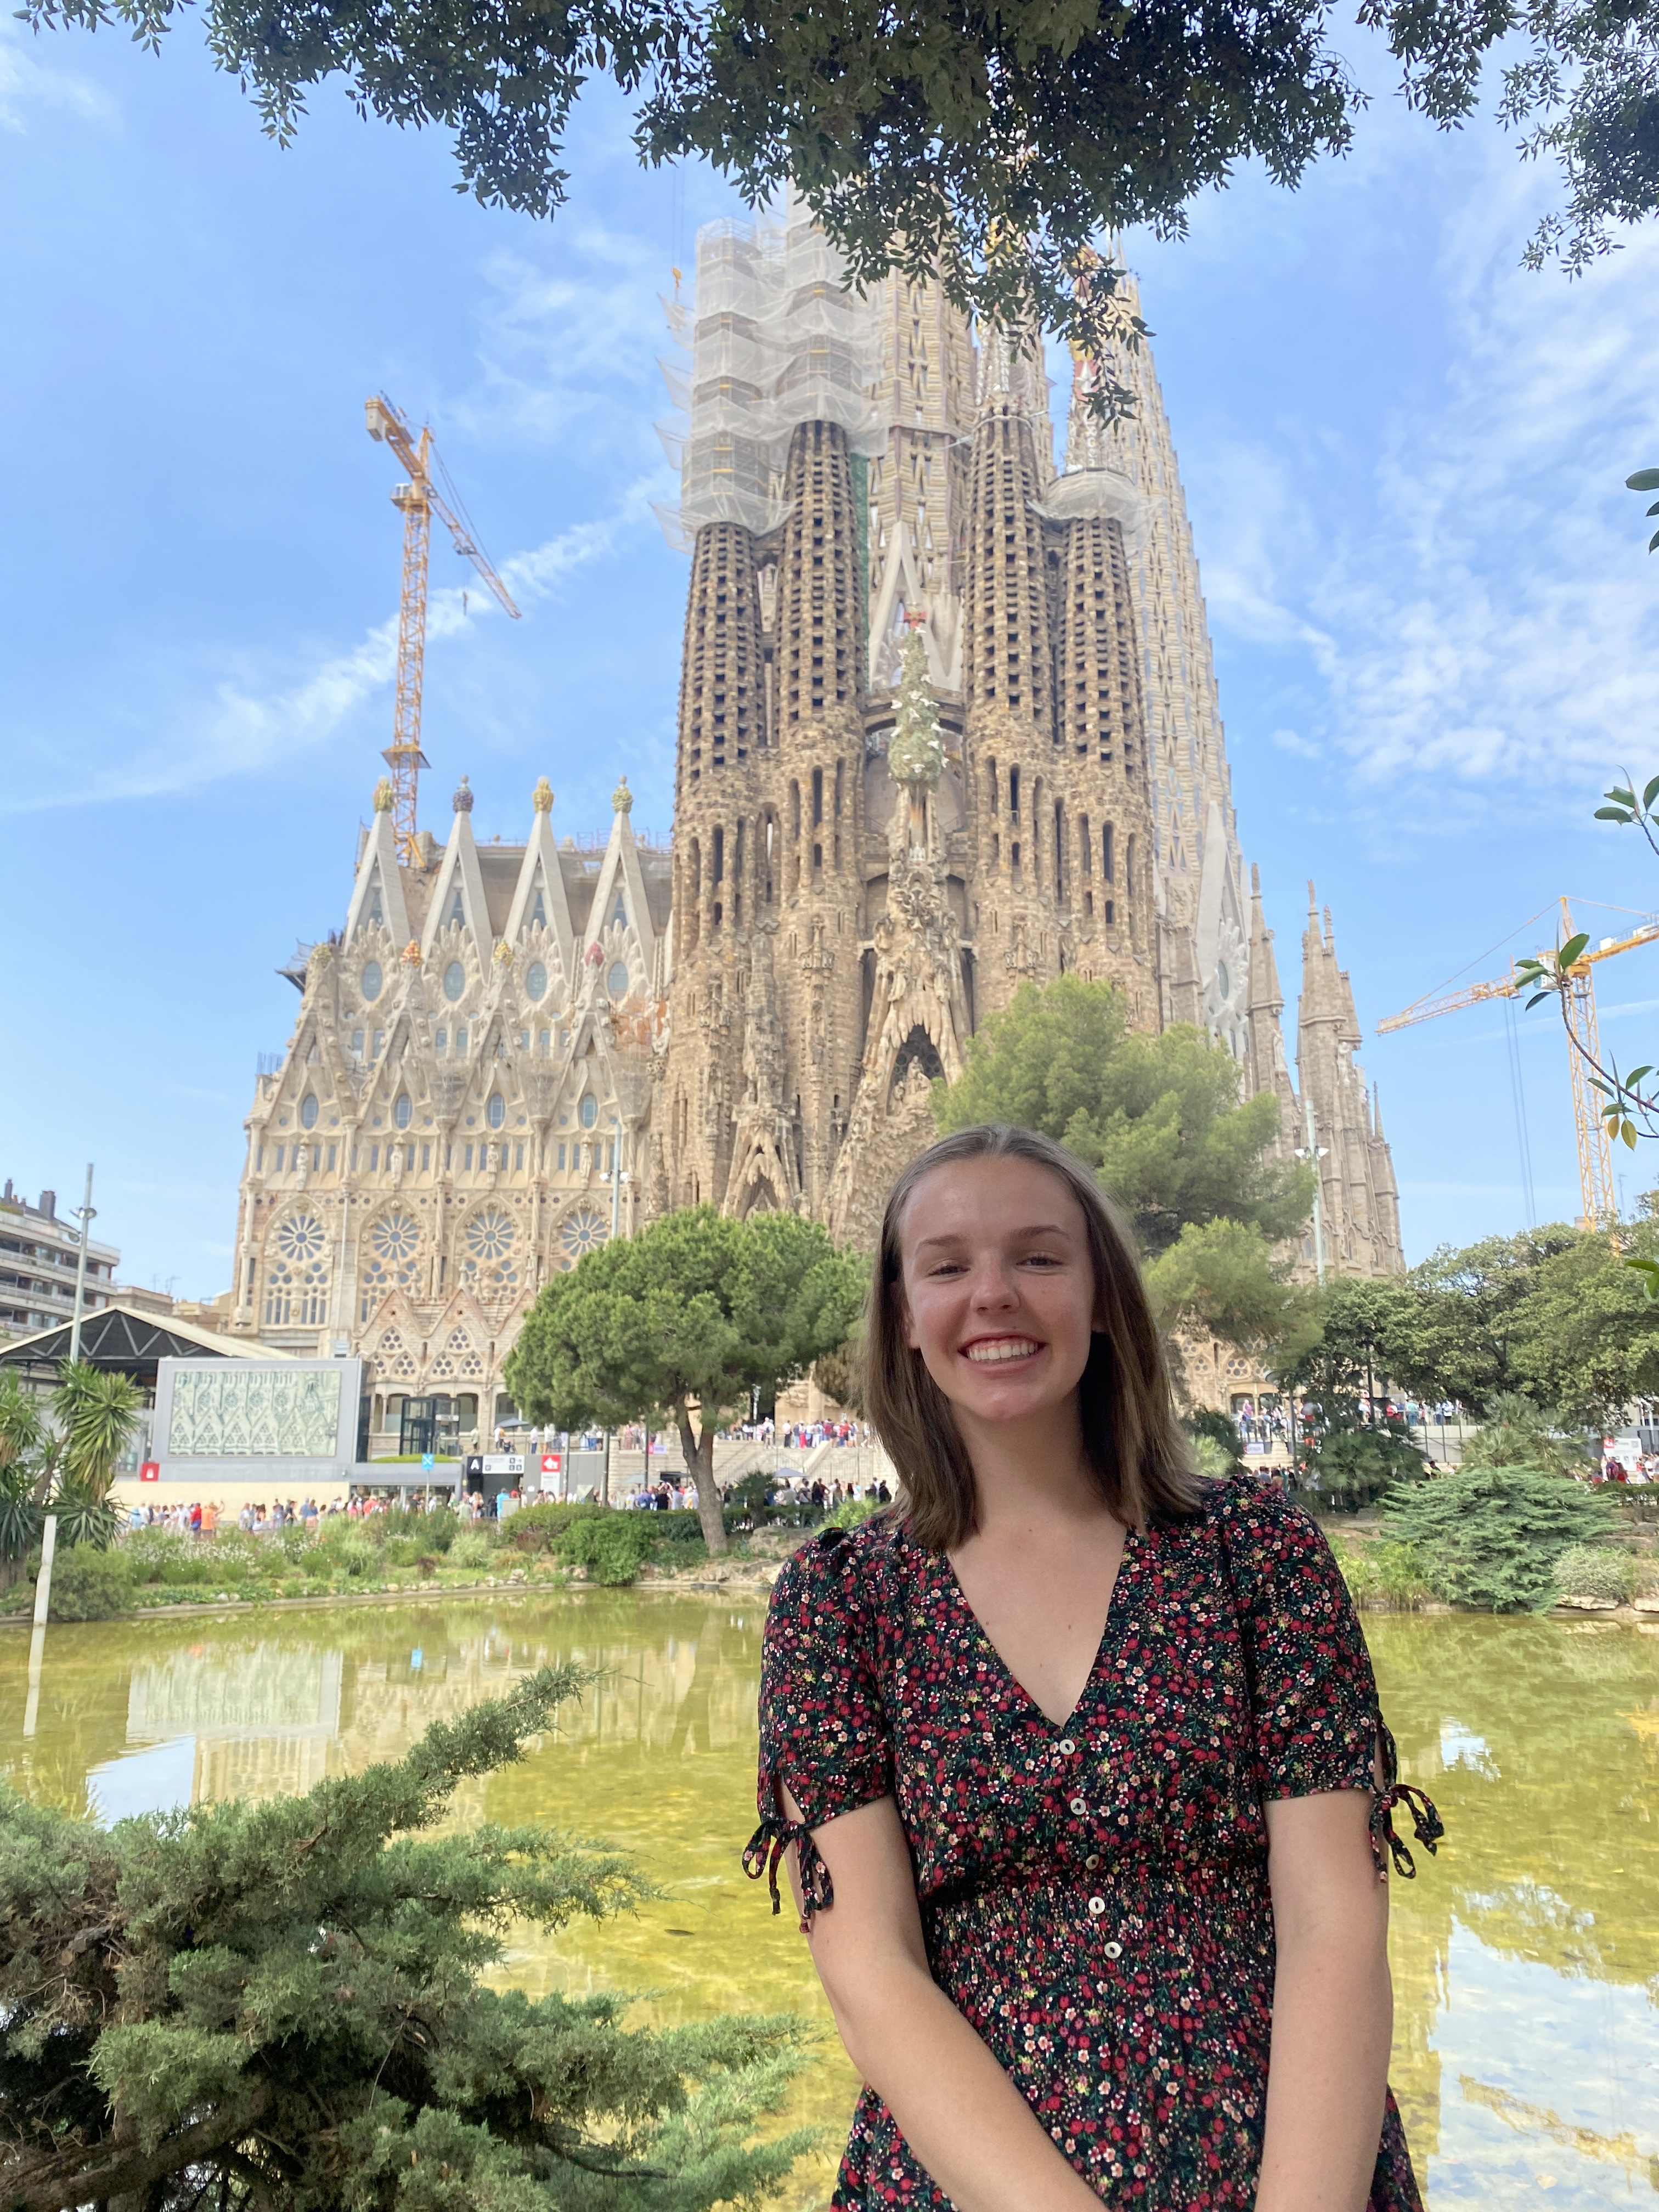 A person standing and smiling in front of La Sagrada Familia during the day at a park with trees and a pond in the background.